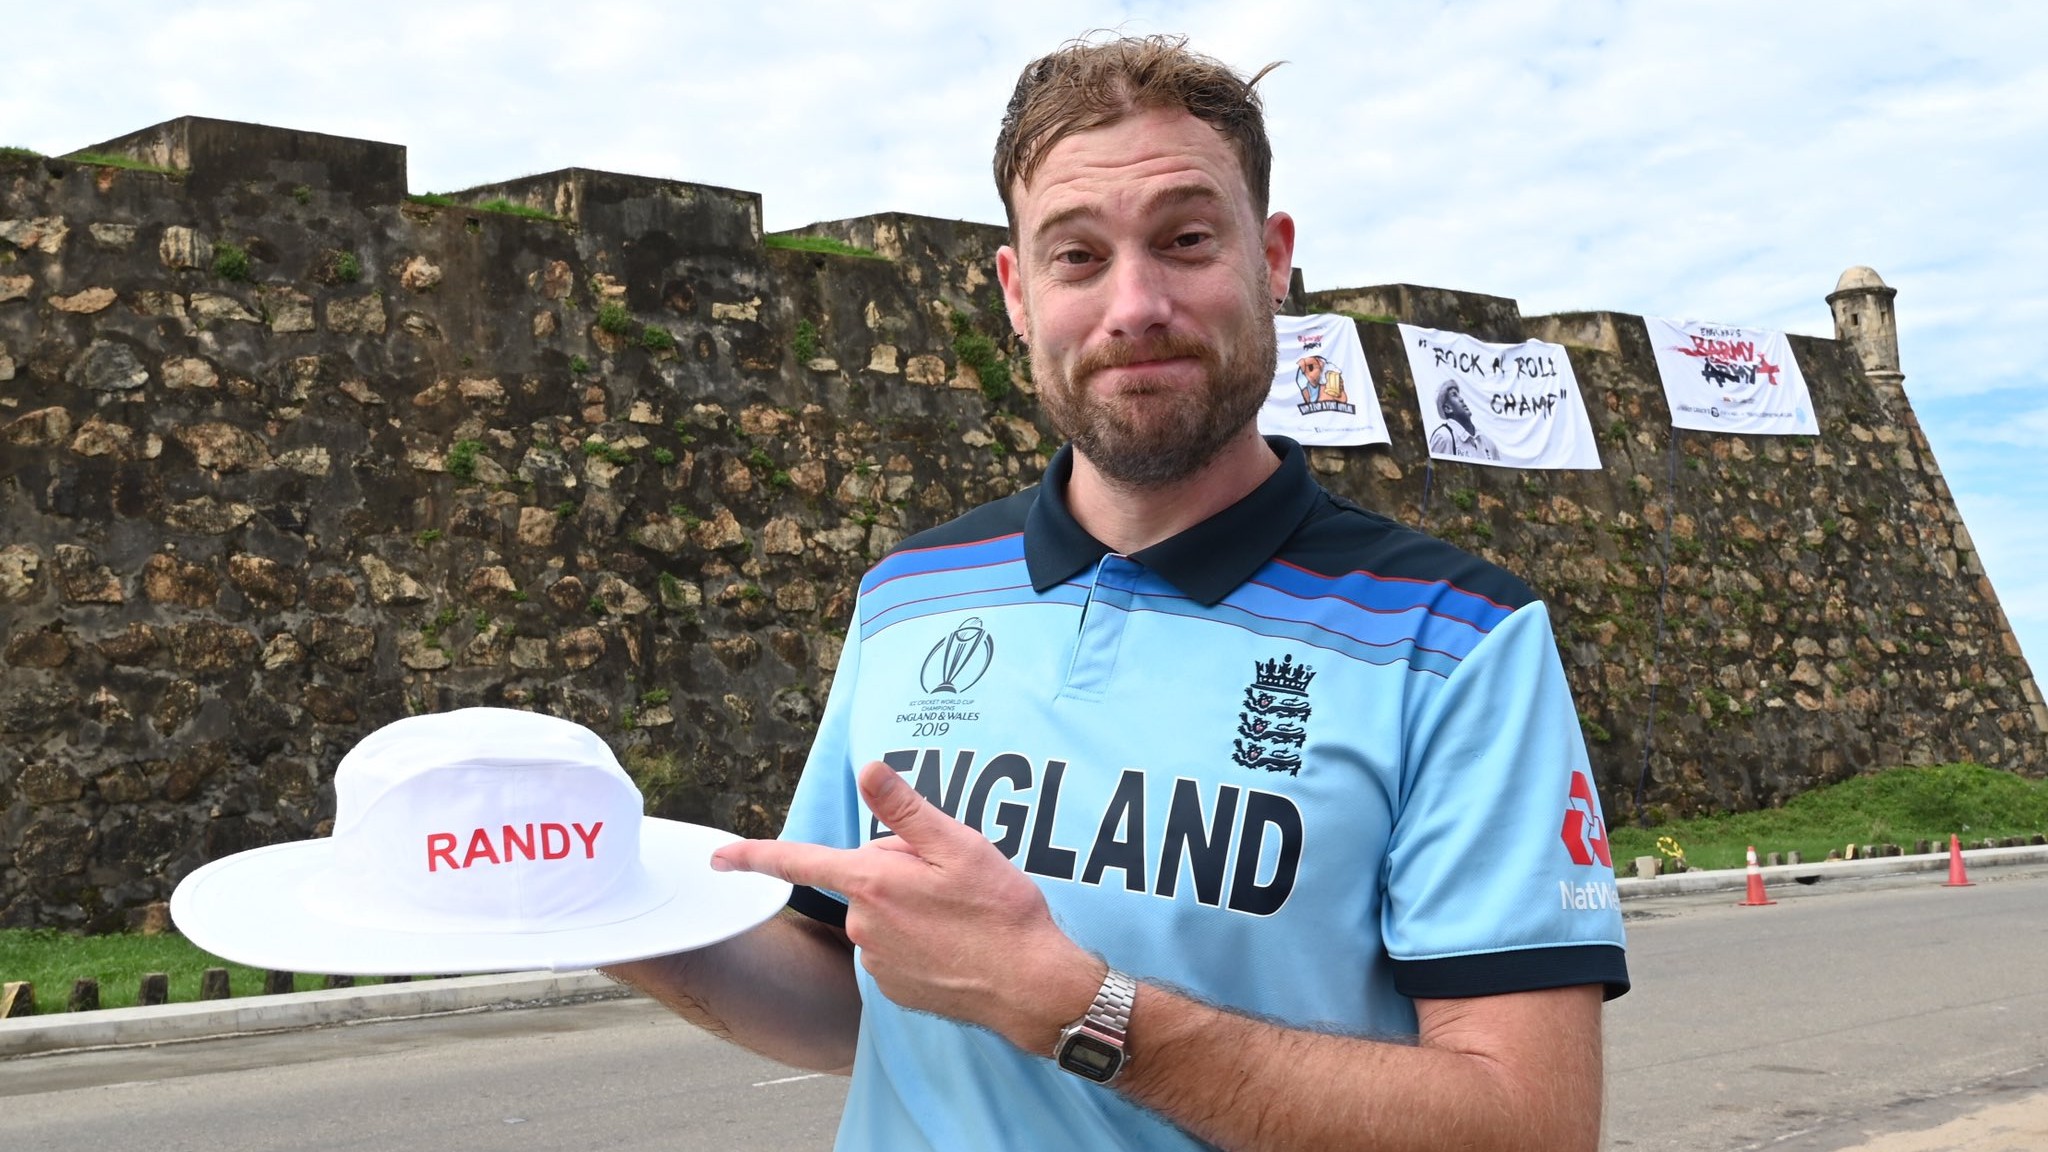 SL v ENG 2021: England fan waits 10 months in Sri Lanka for Test series; thrown out on Day 1